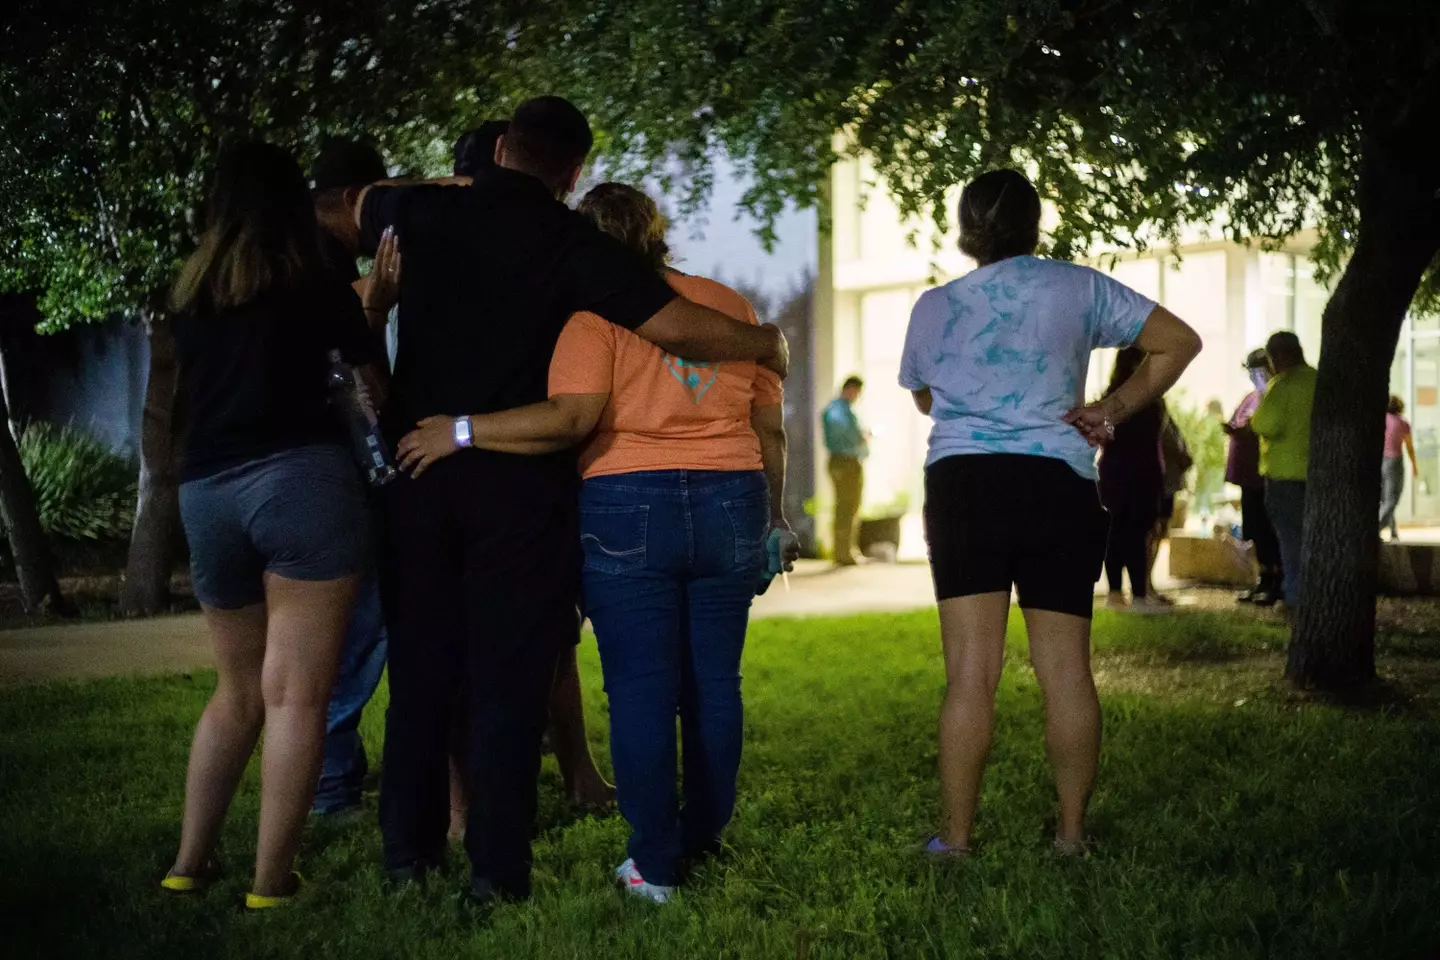 Families in Uvalde, Texas, awaiting news after the massacre.